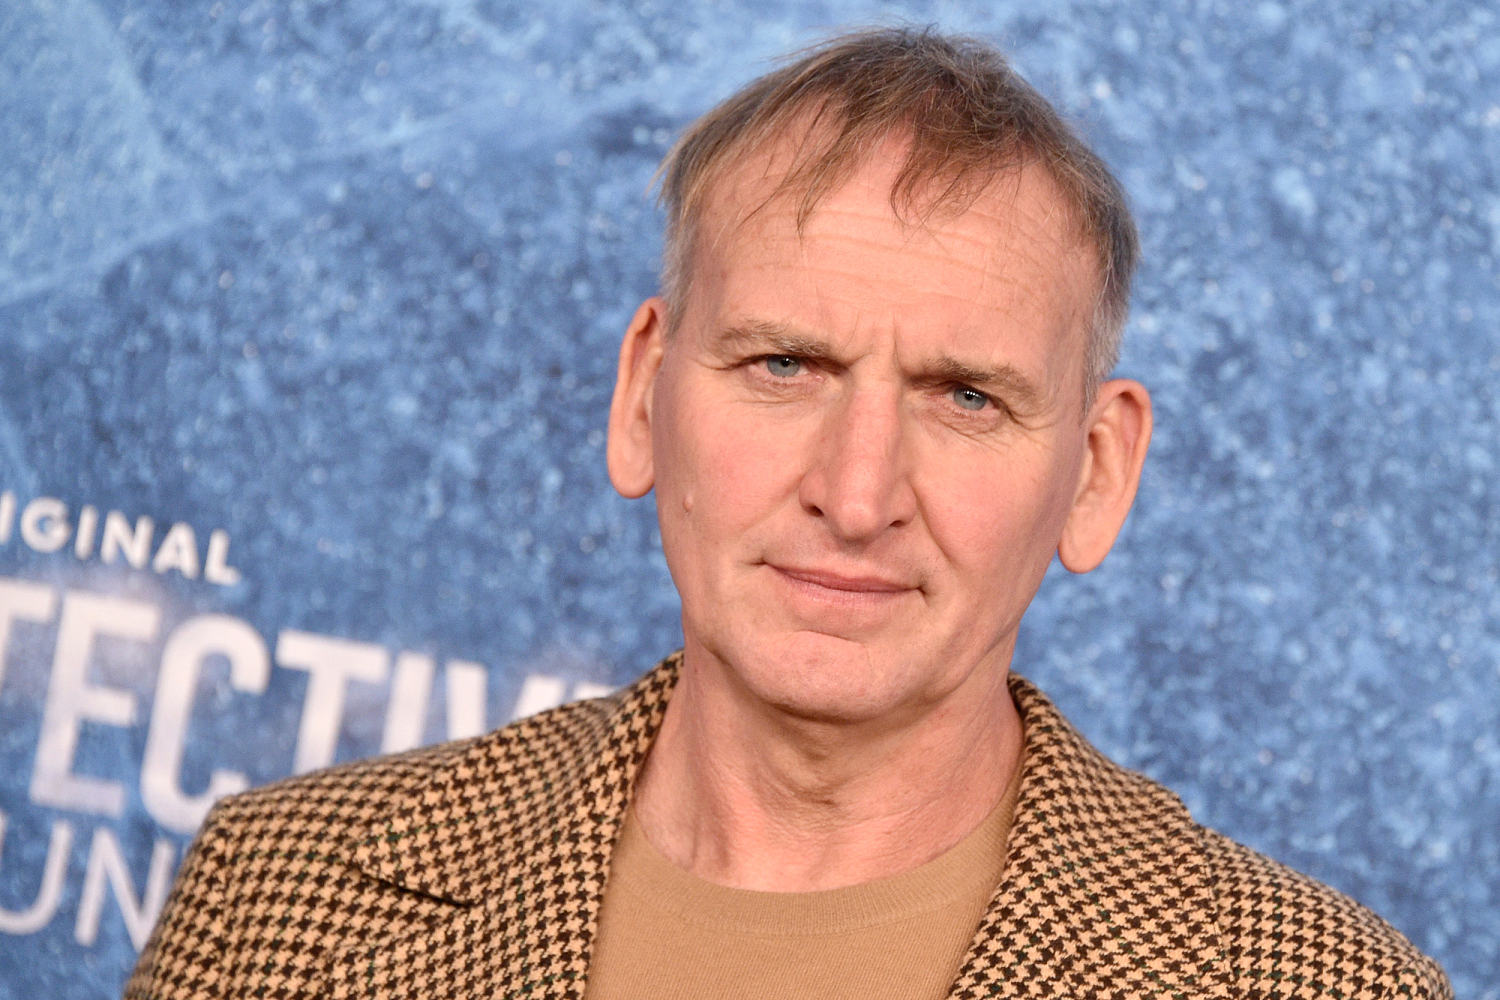 Christopher Eccleston says ‘A-list actress’ accused him of ‘copping a feel’ during sex scene